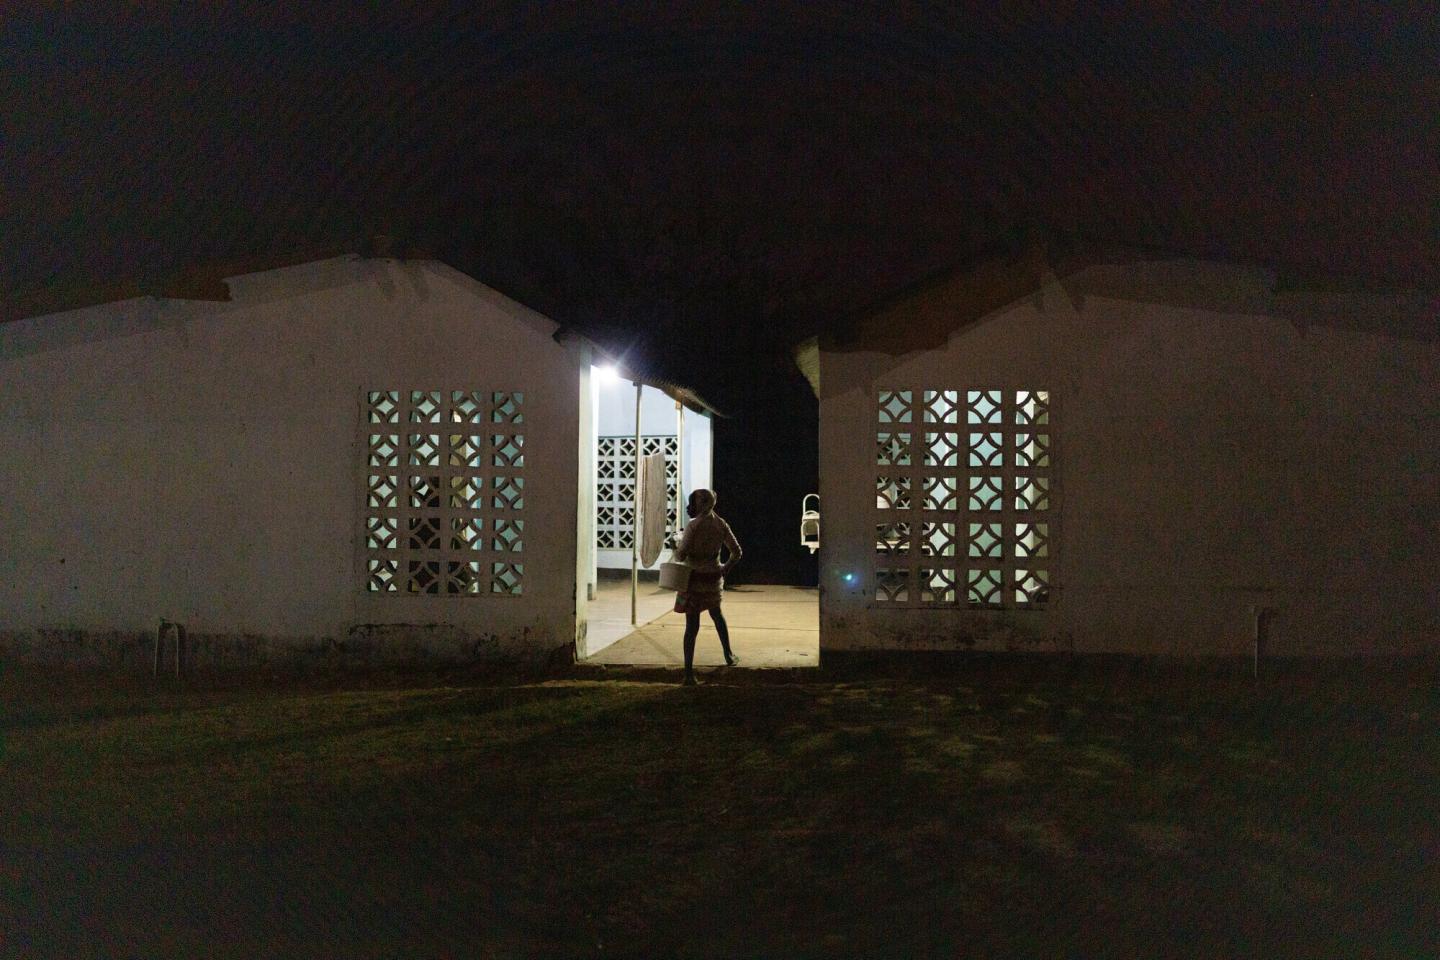 A person stands between two buildings. They are silhouetted by the lights coming from the buildings